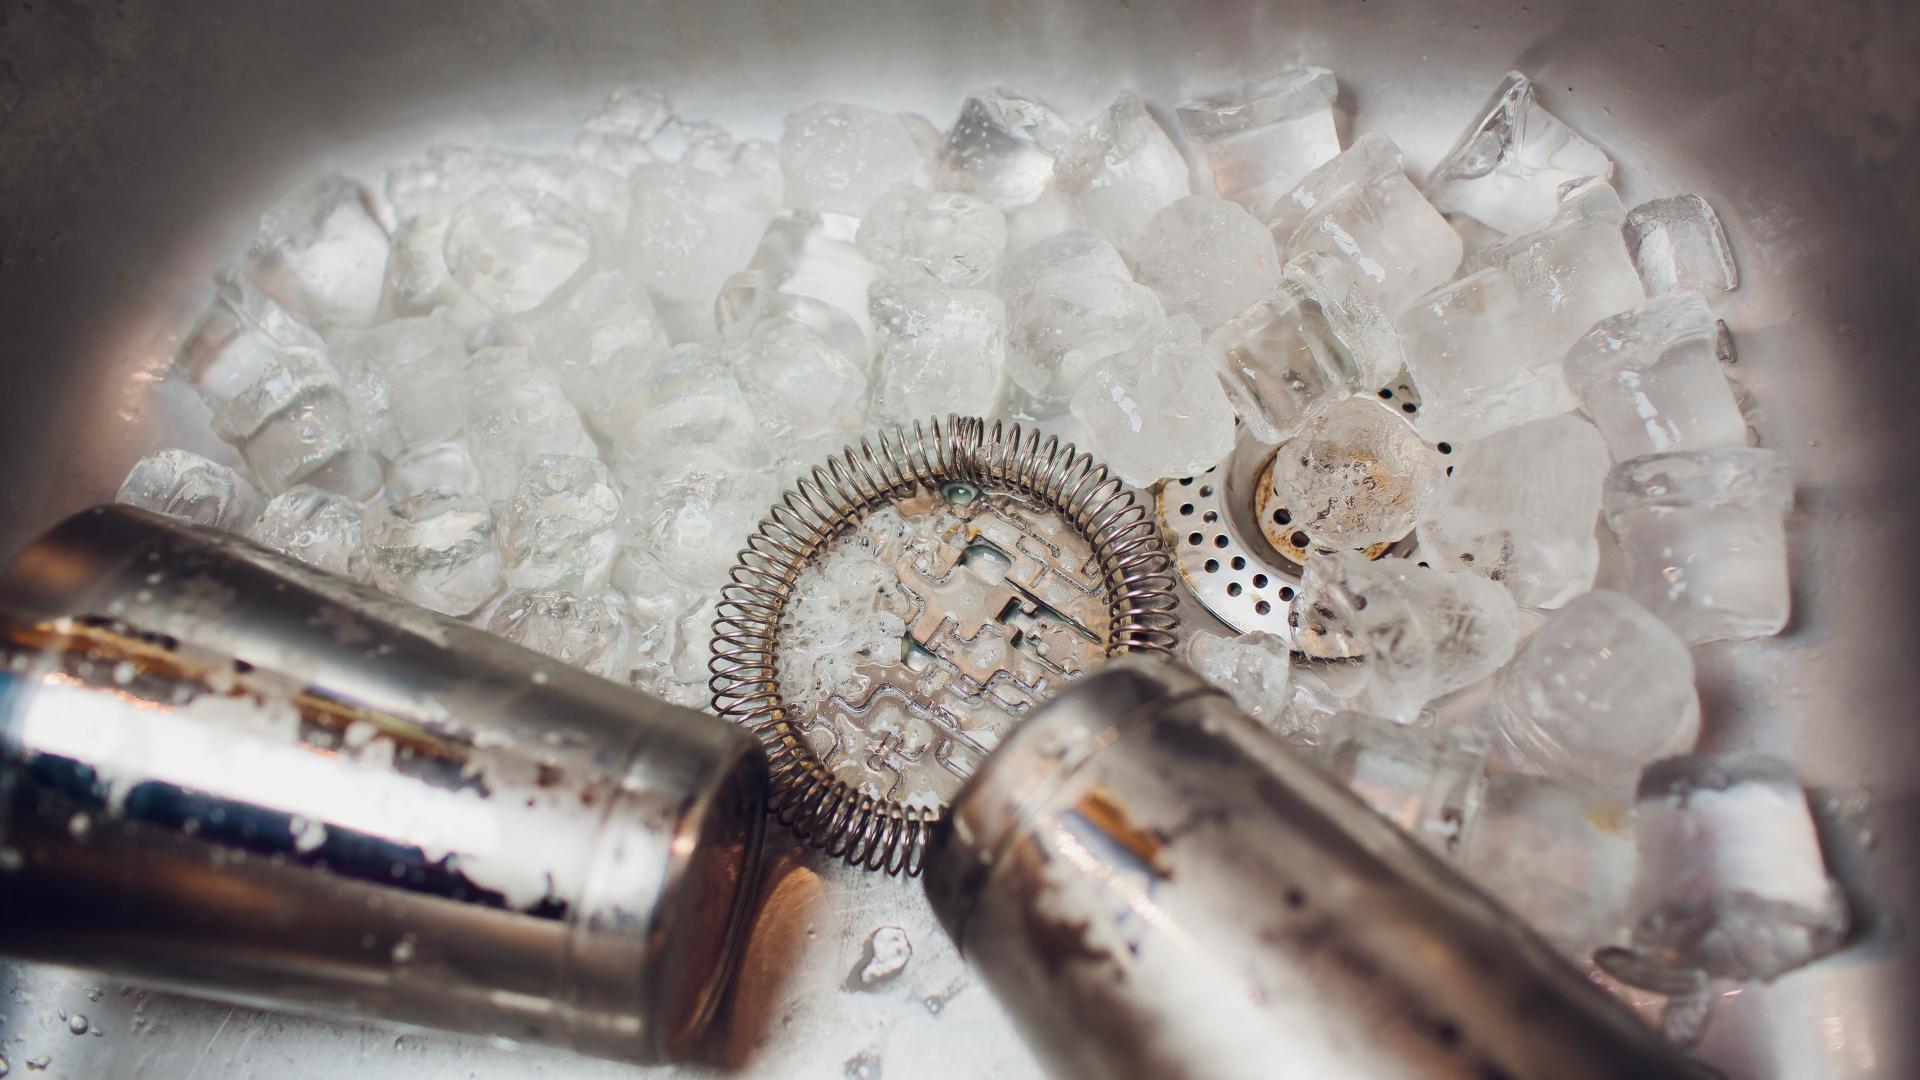 bartender equipment in a sink with ice